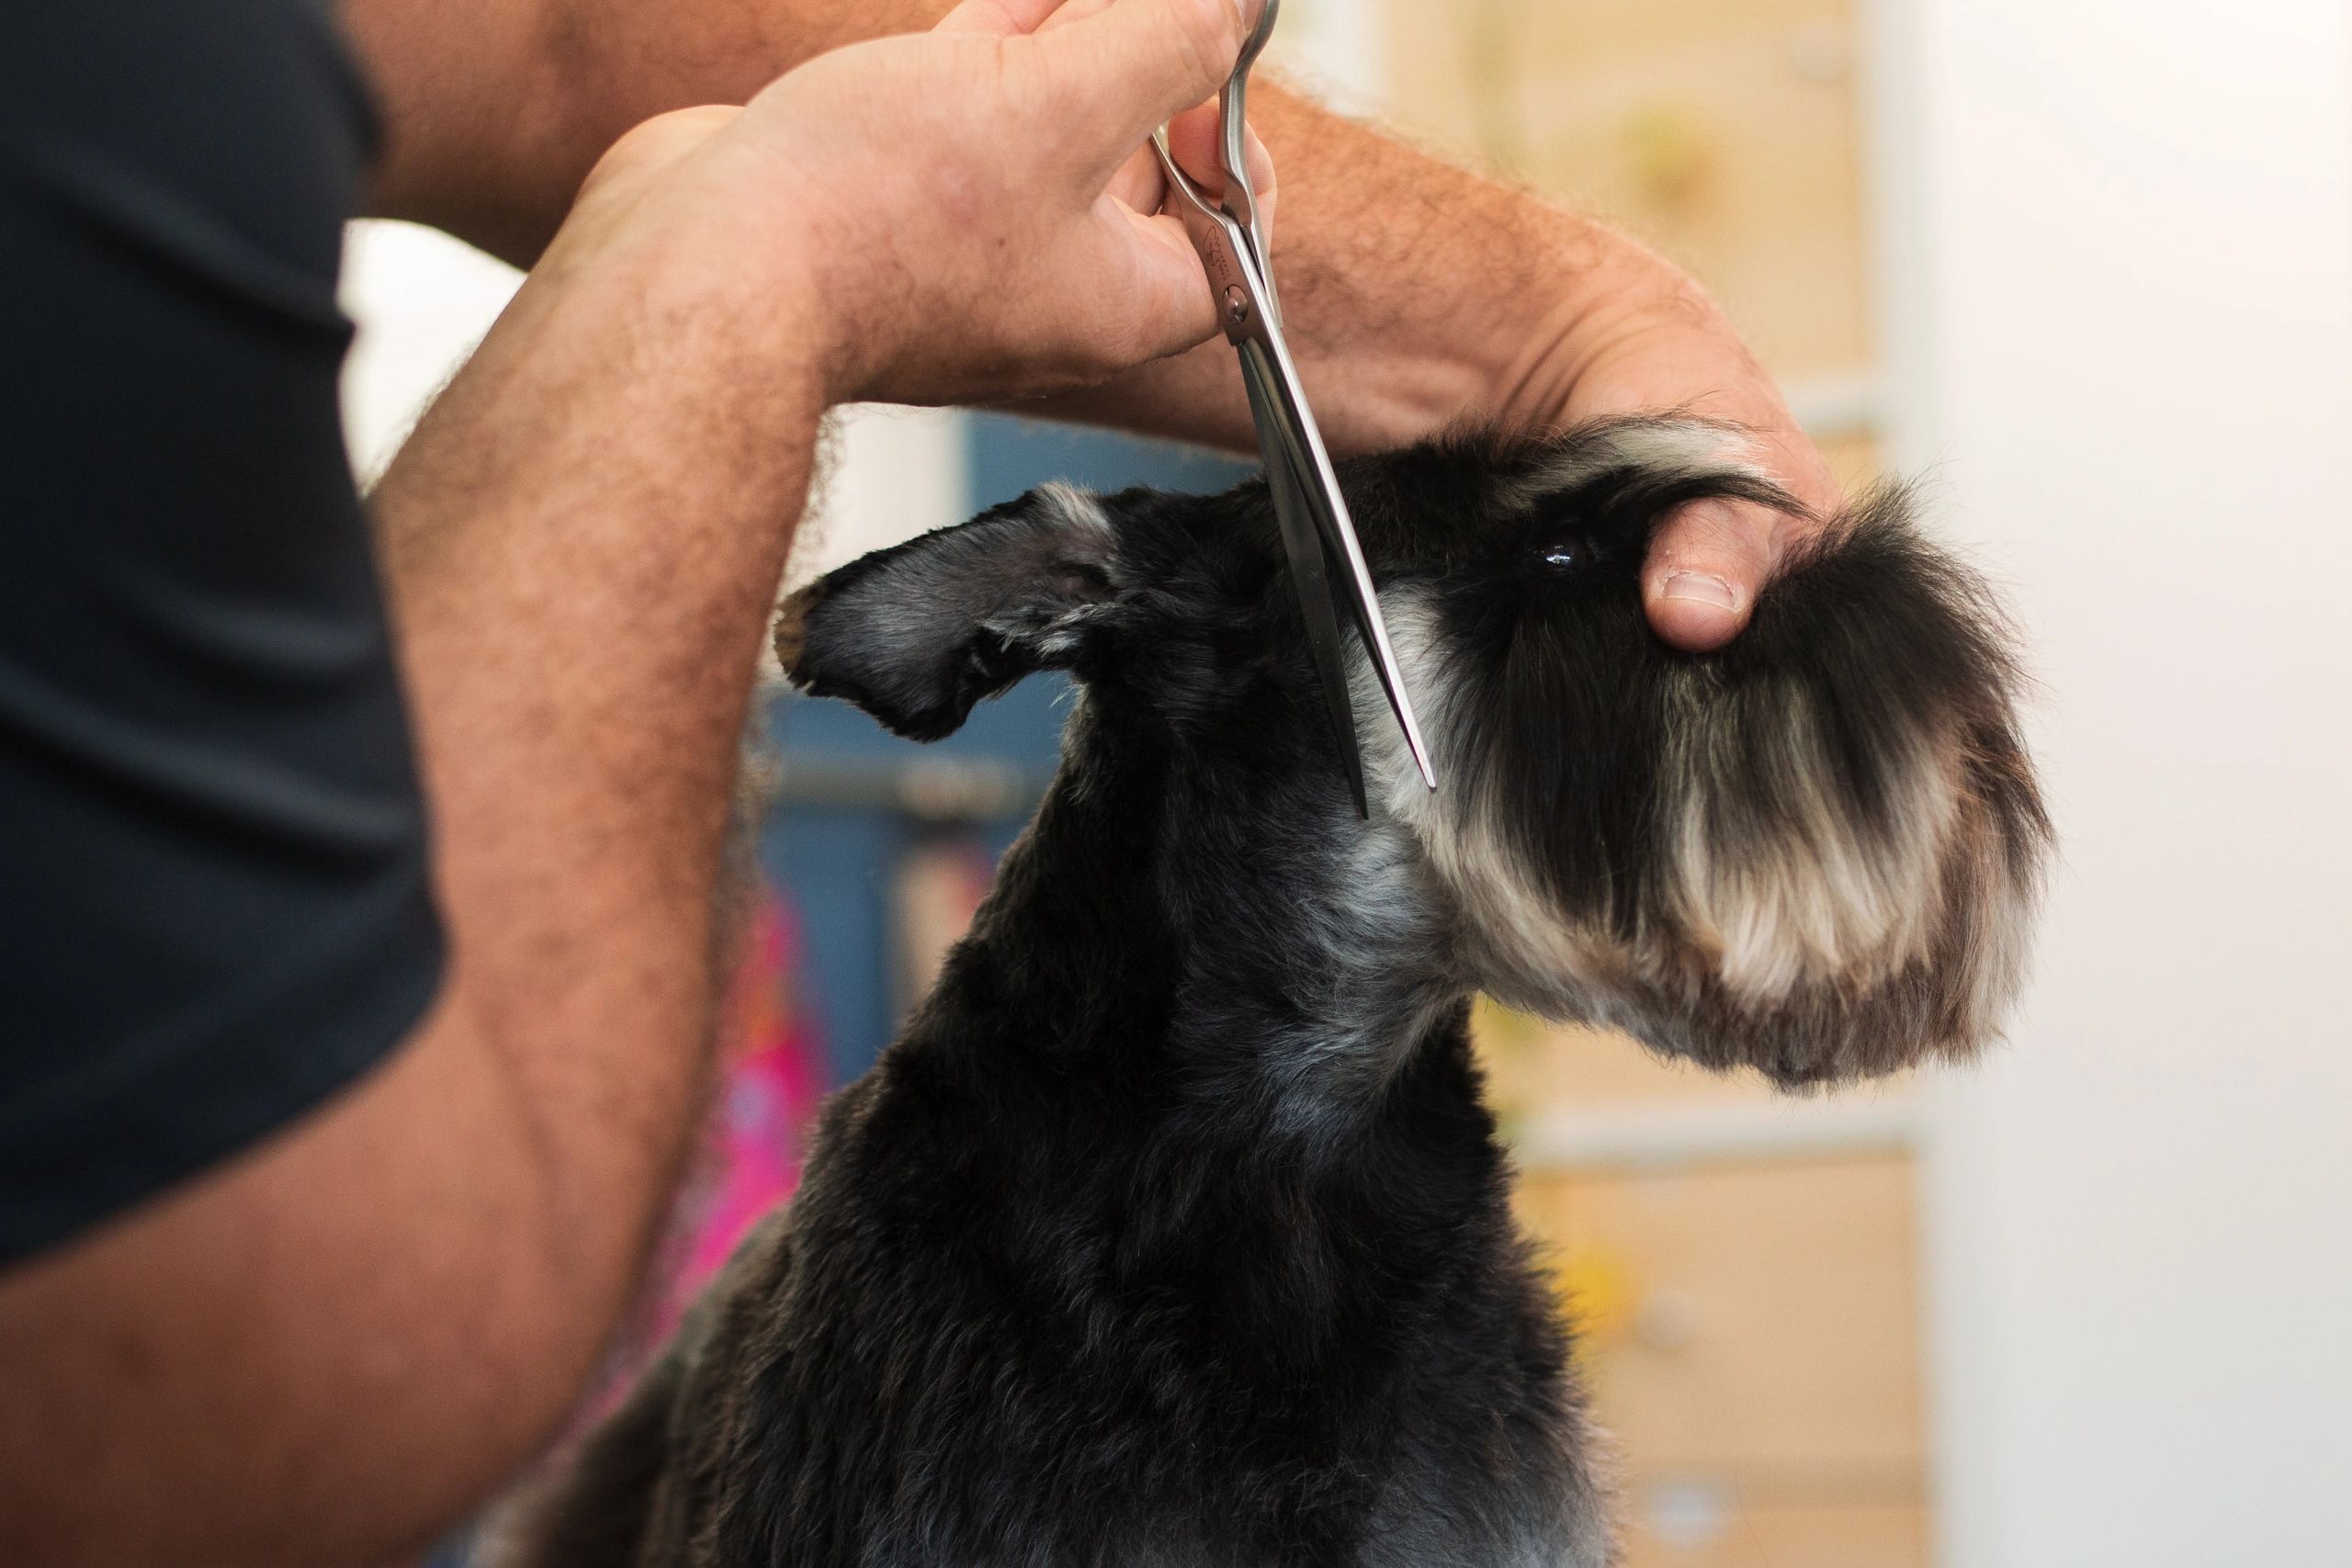 Dog grooming products for at-home care